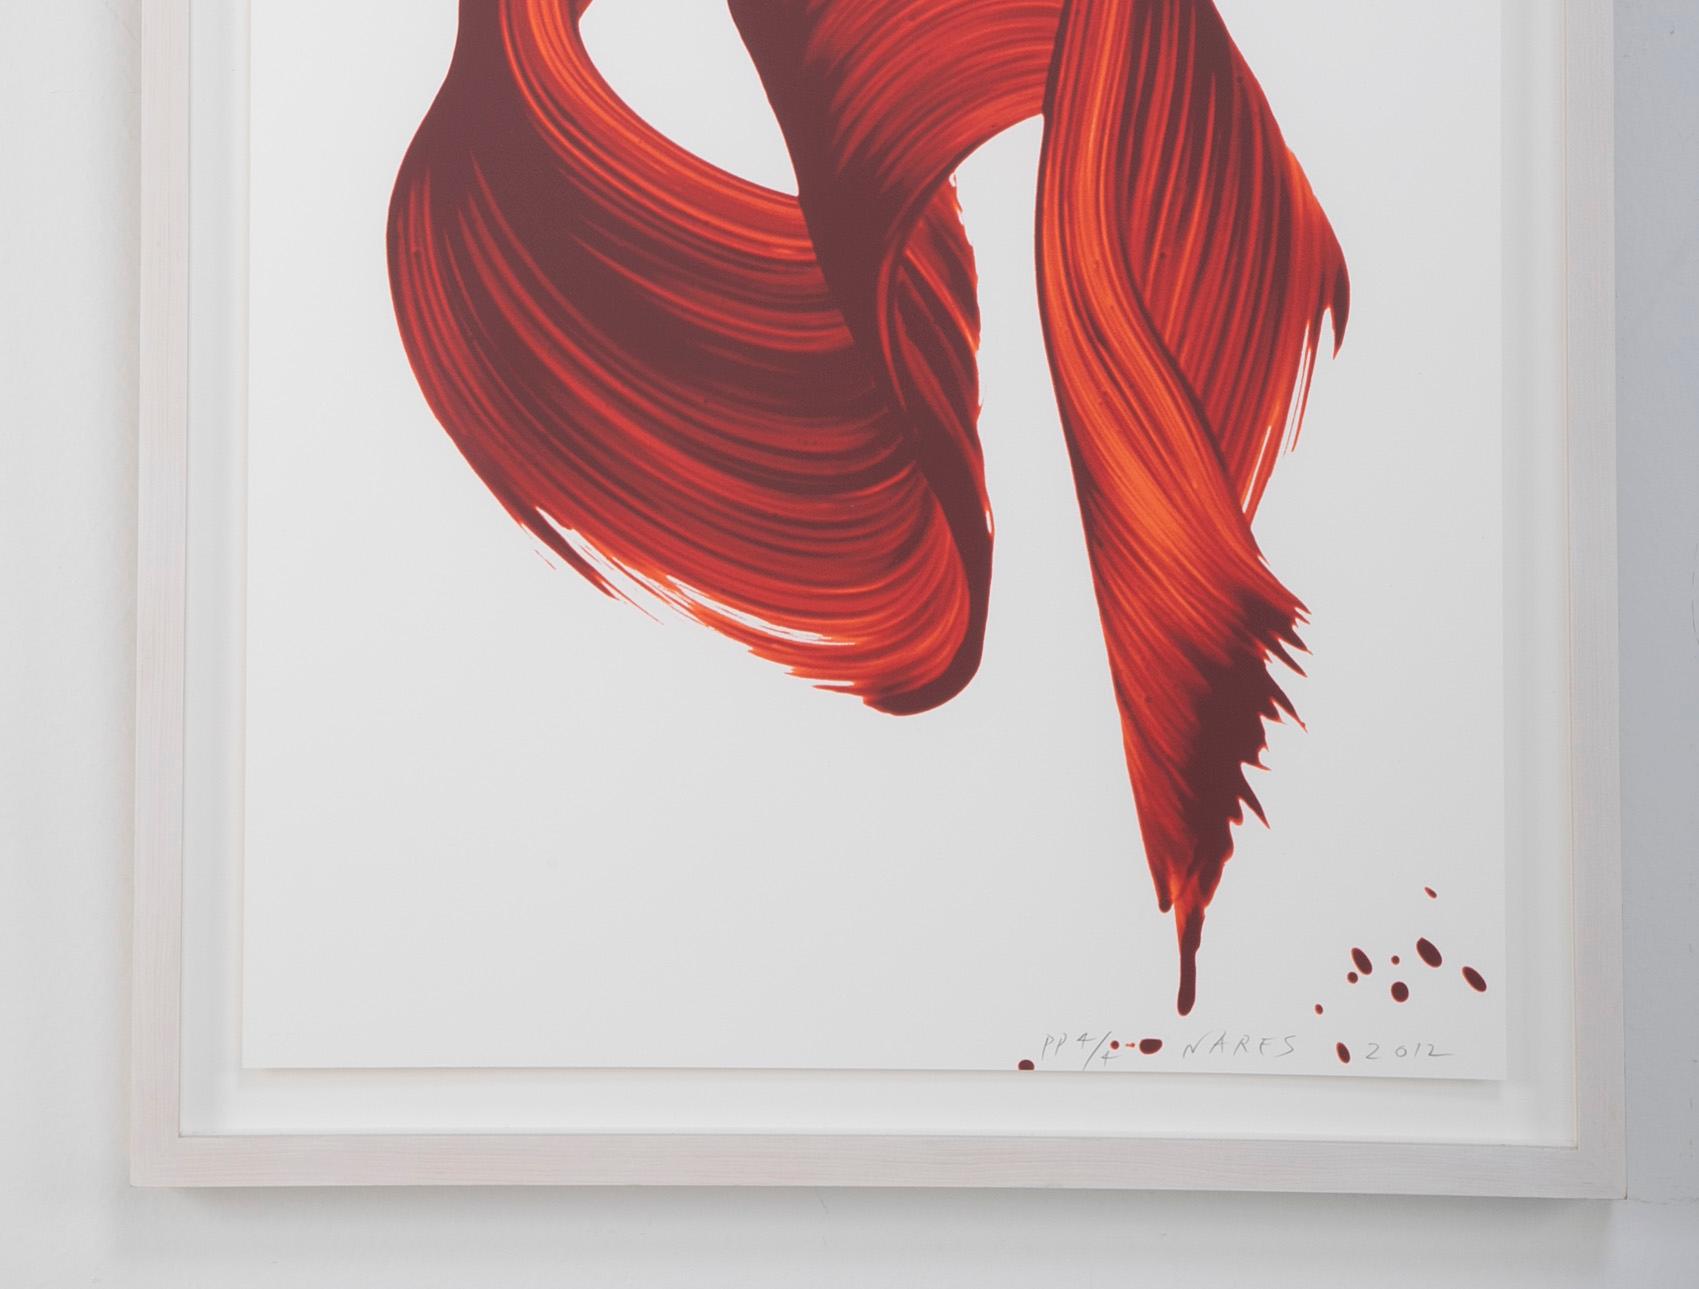 A 2012 screen print by James Nares titled 